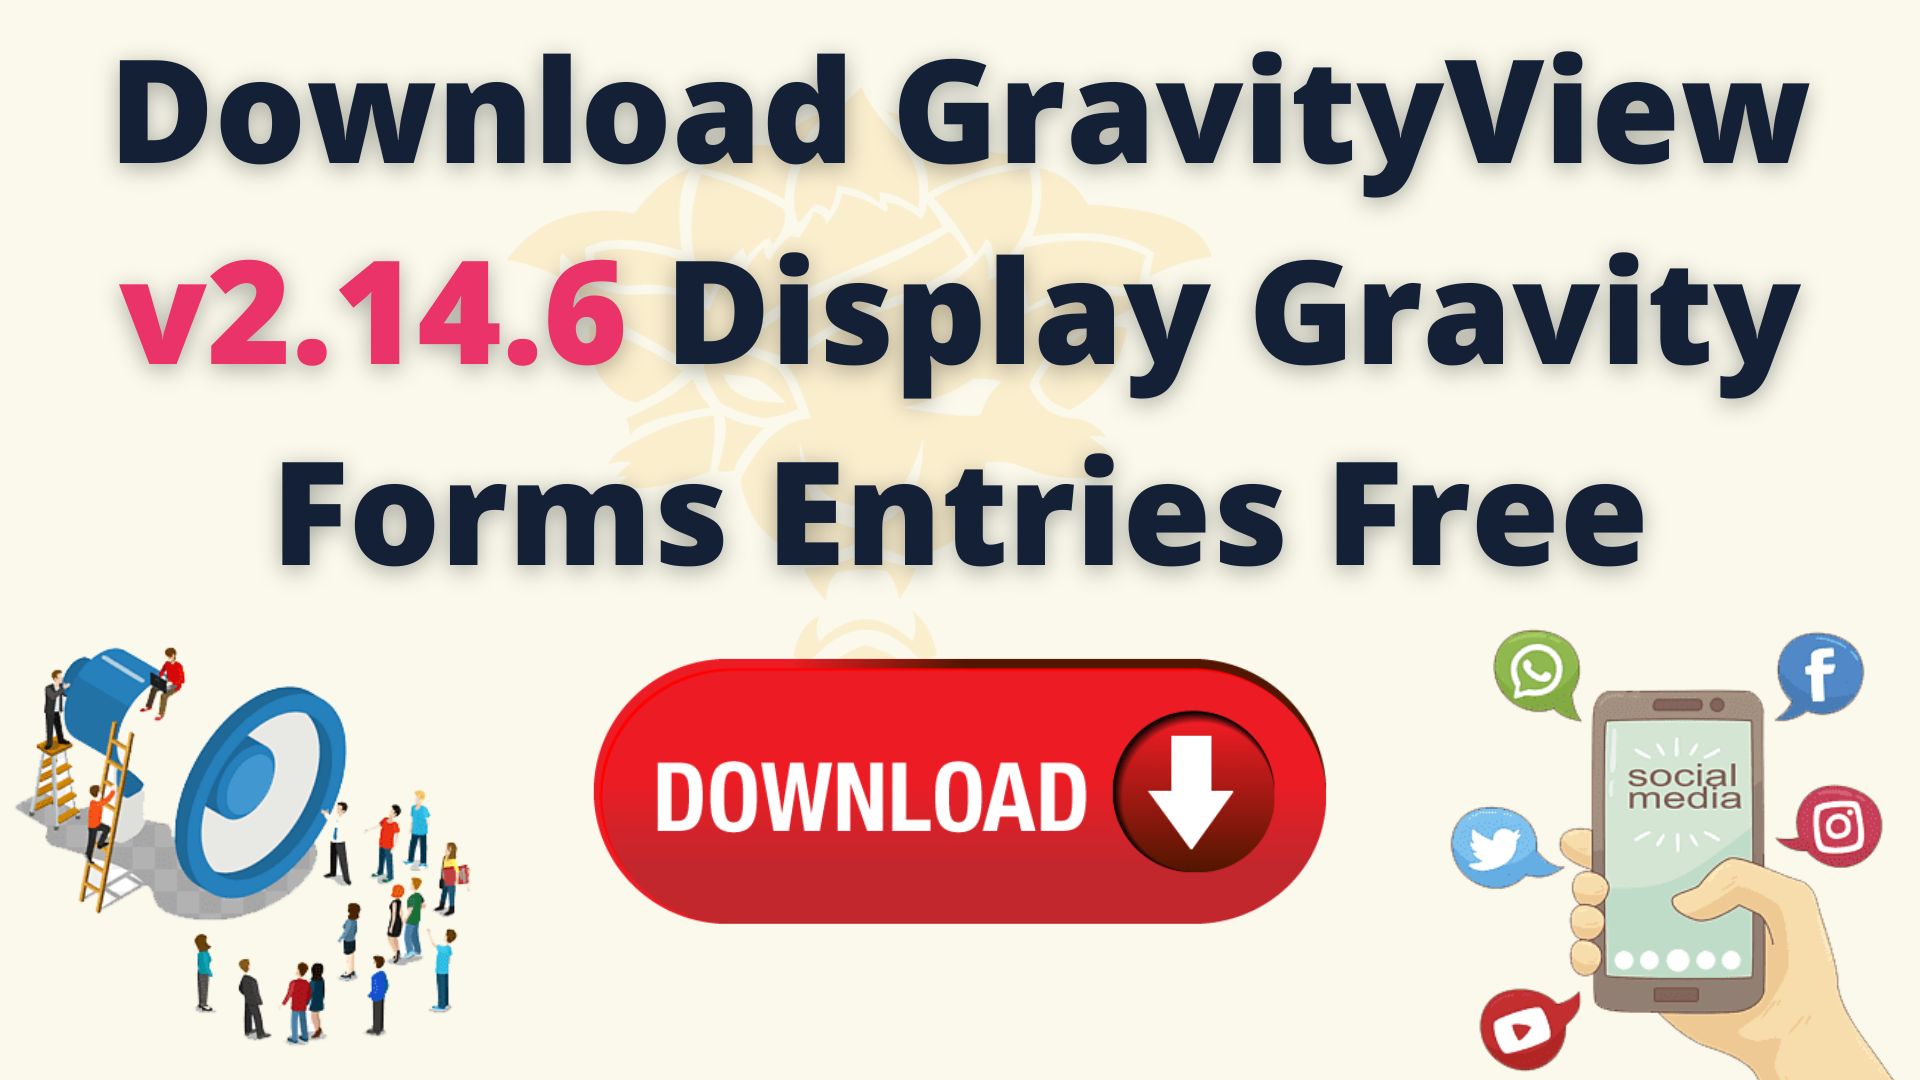 Download Gravityview V2.14.6 Forms Entries Free